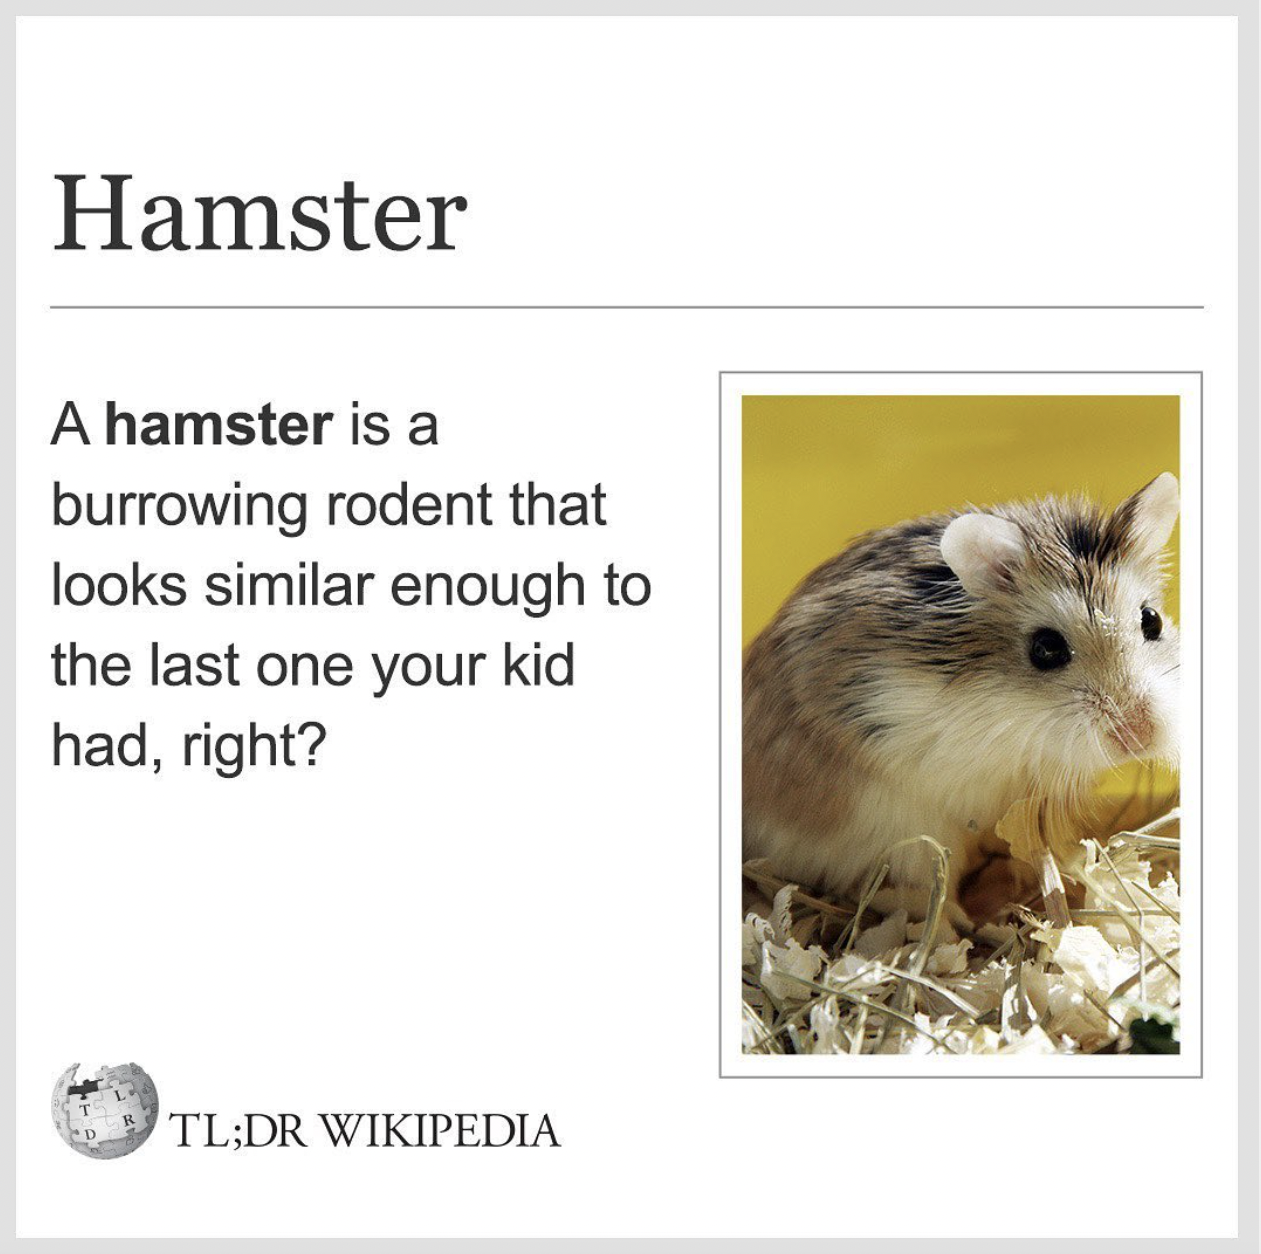 Wikipedia Memes - fauna - Hamster A hamster is a burrowing rodent that looks similar enough to the last one your kid had, right? Tl;Dr Wikipedia